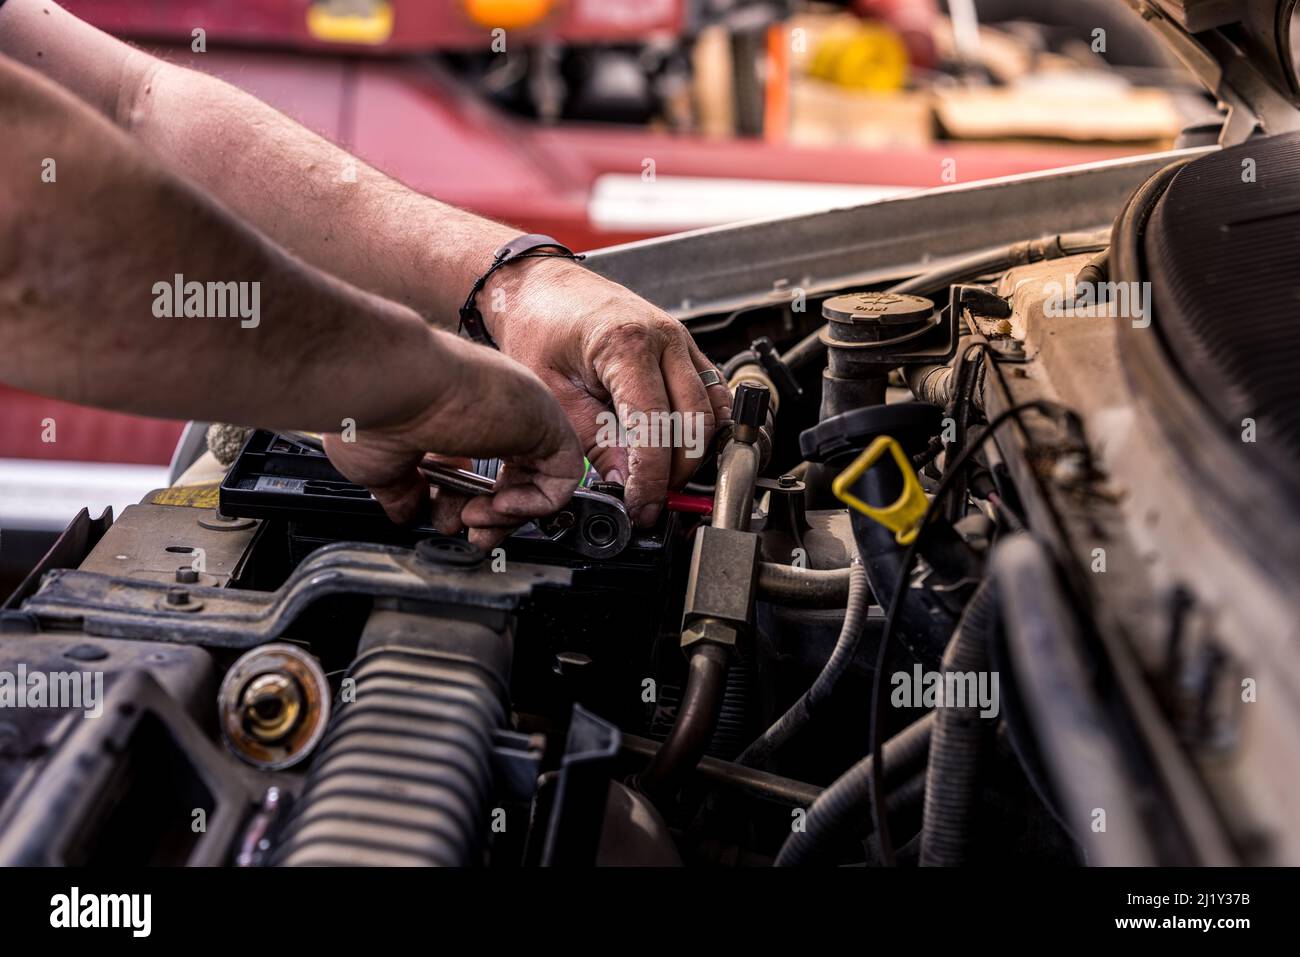 Mechanic with dirty hands works on car engine. Authentic shot of real auto mechanic working on motor. Stock Photo